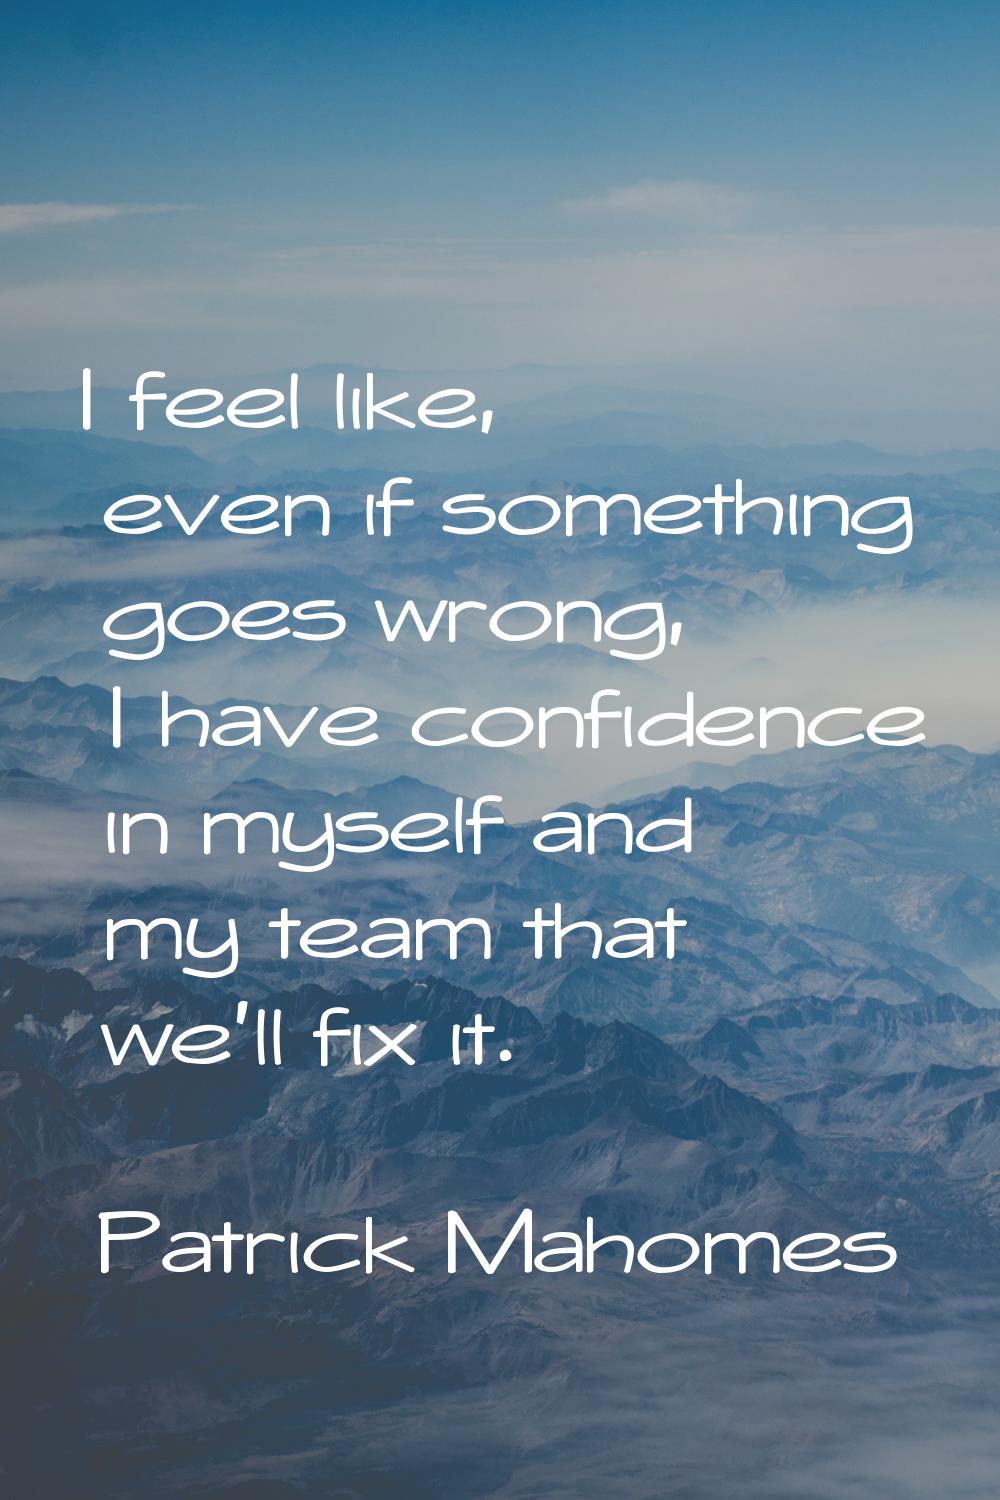 I feel like, even if something goes wrong, I have confidence in myself and my team that we'll fix i